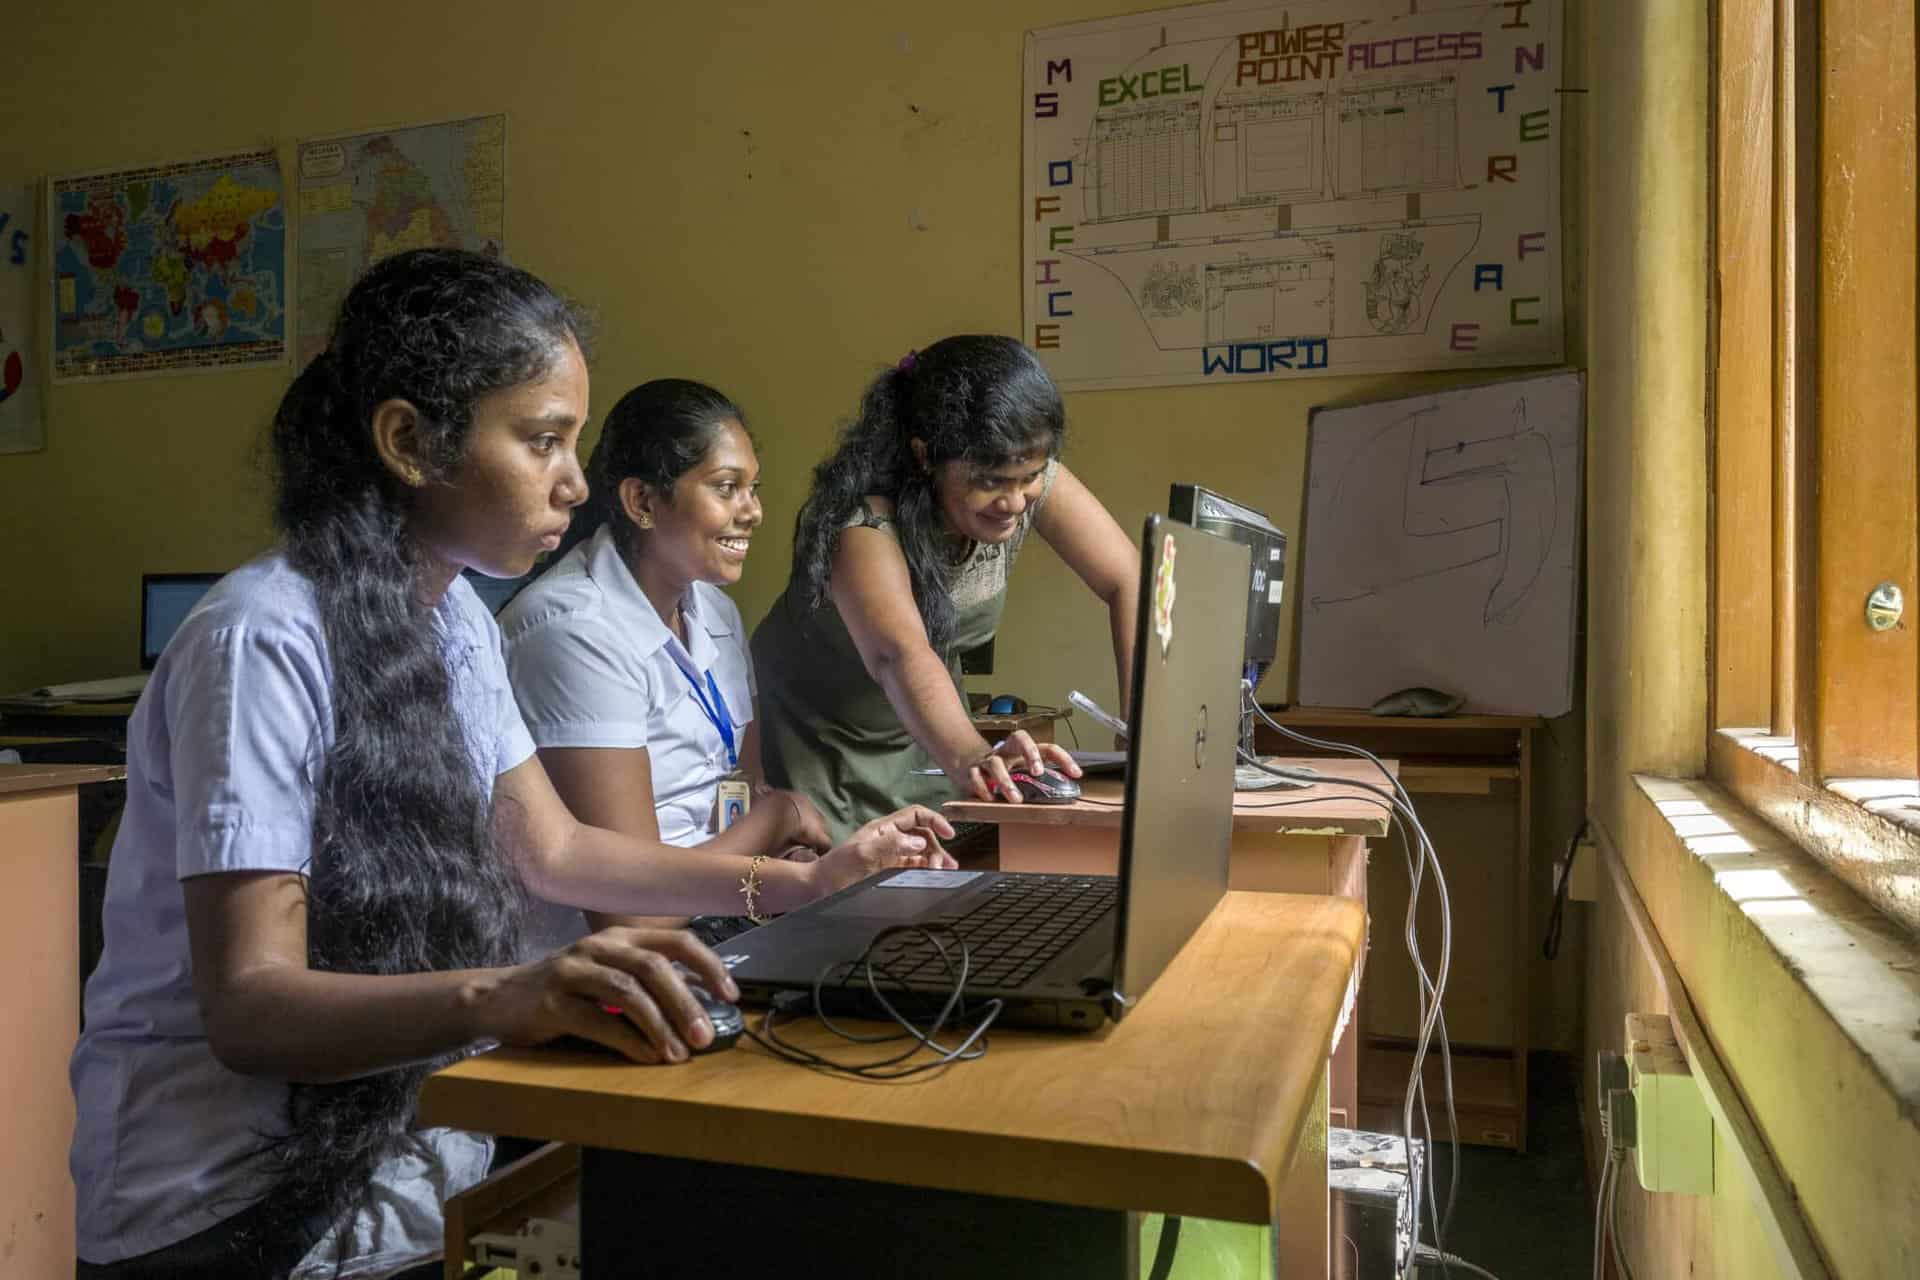 Press release - 8 March, International Women's Rights Day: Girls and women in India break codes with Action Education